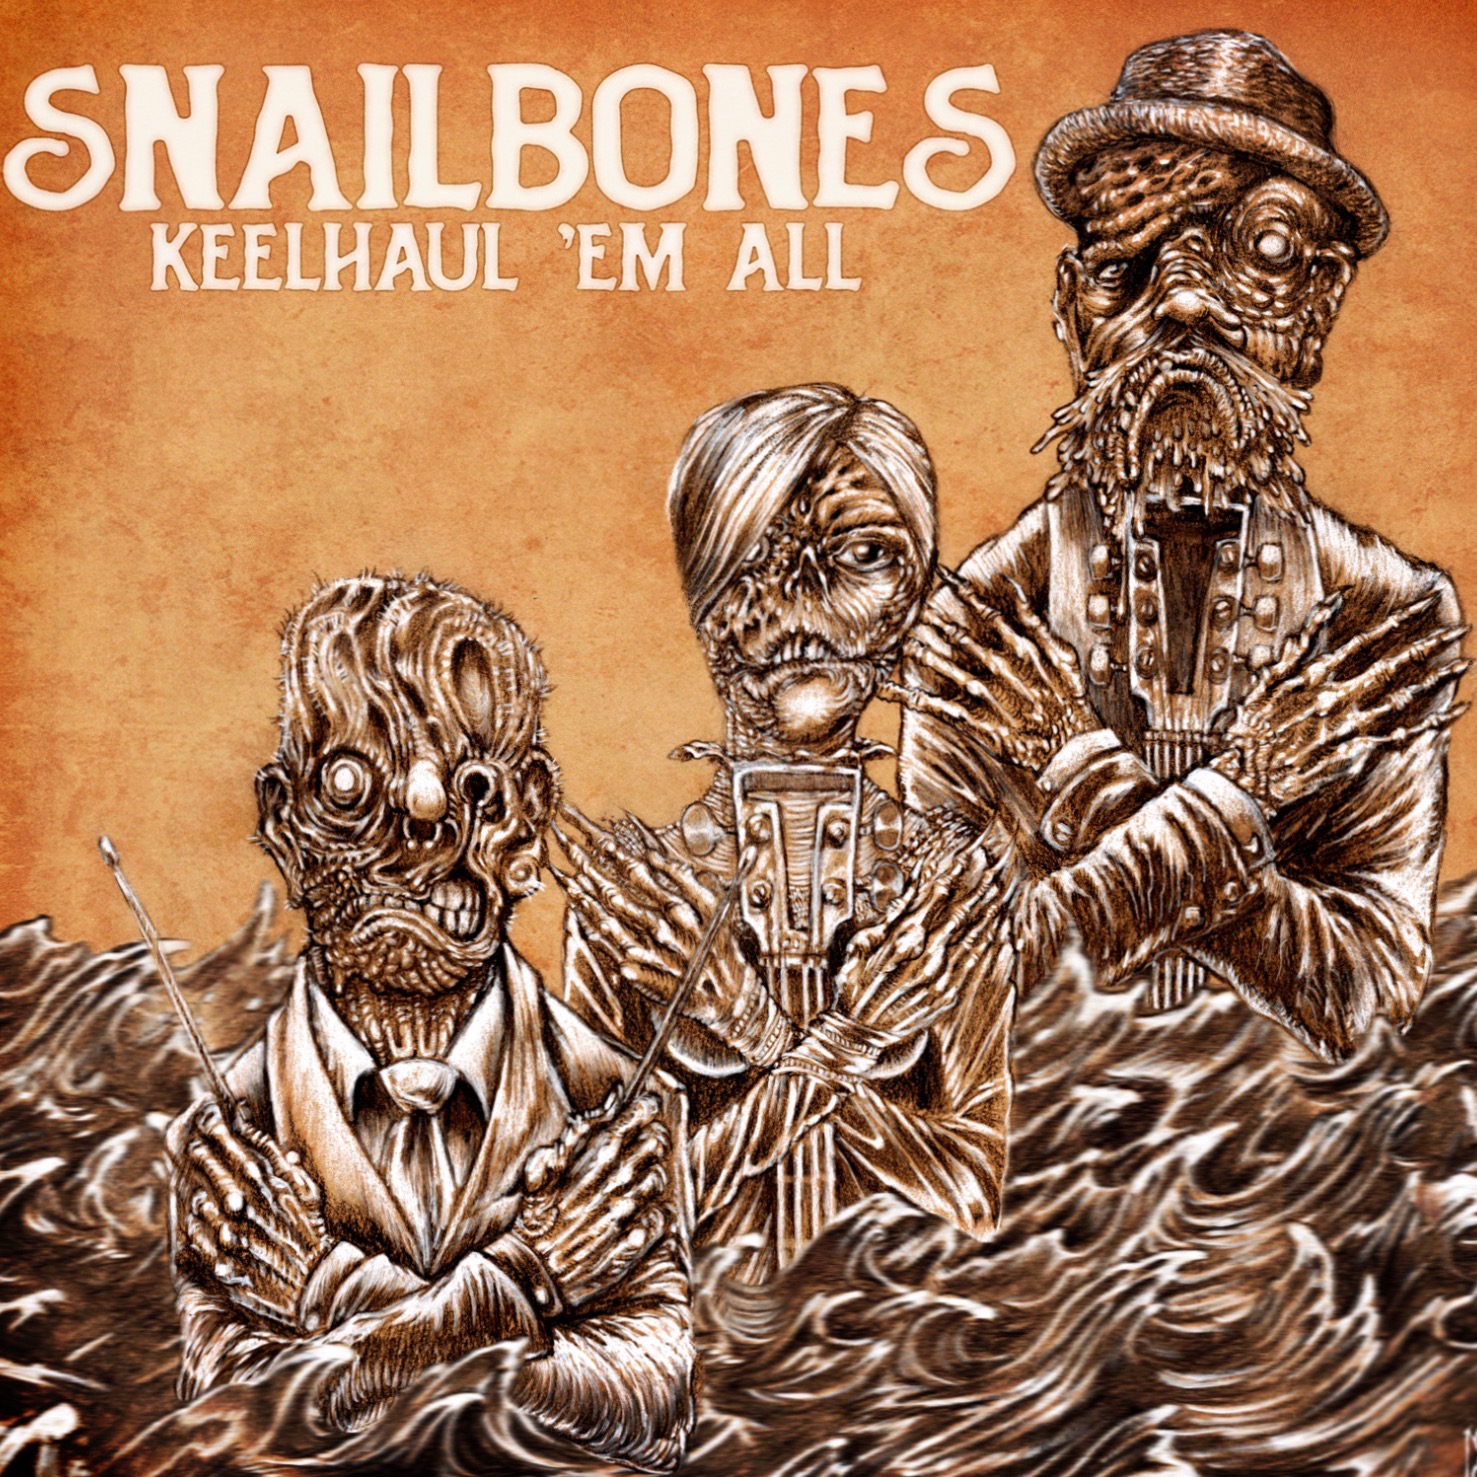 Showing us how to rock again, Check out the power of ‘Snailbones’ as they drop new album ‘Keelhaul ‘em All’ full of oceanic pirate themes.